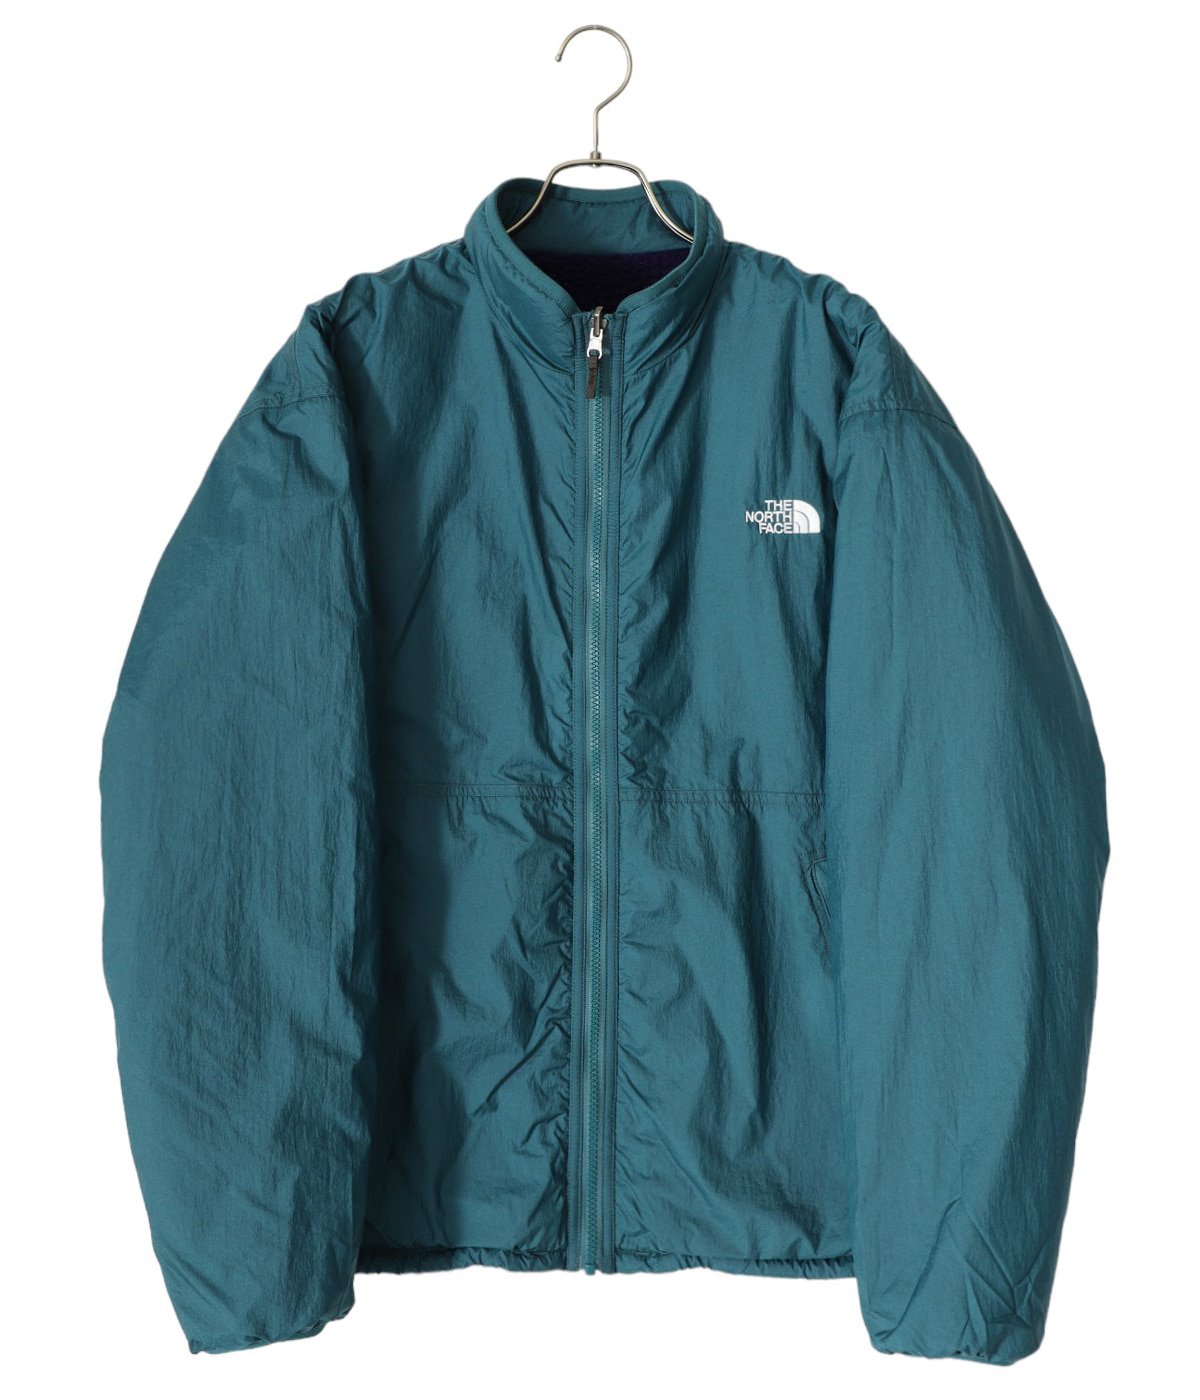 Reversible Extreme Pile Jacket | THE NORTH FACE(ザ ノースフェイス 